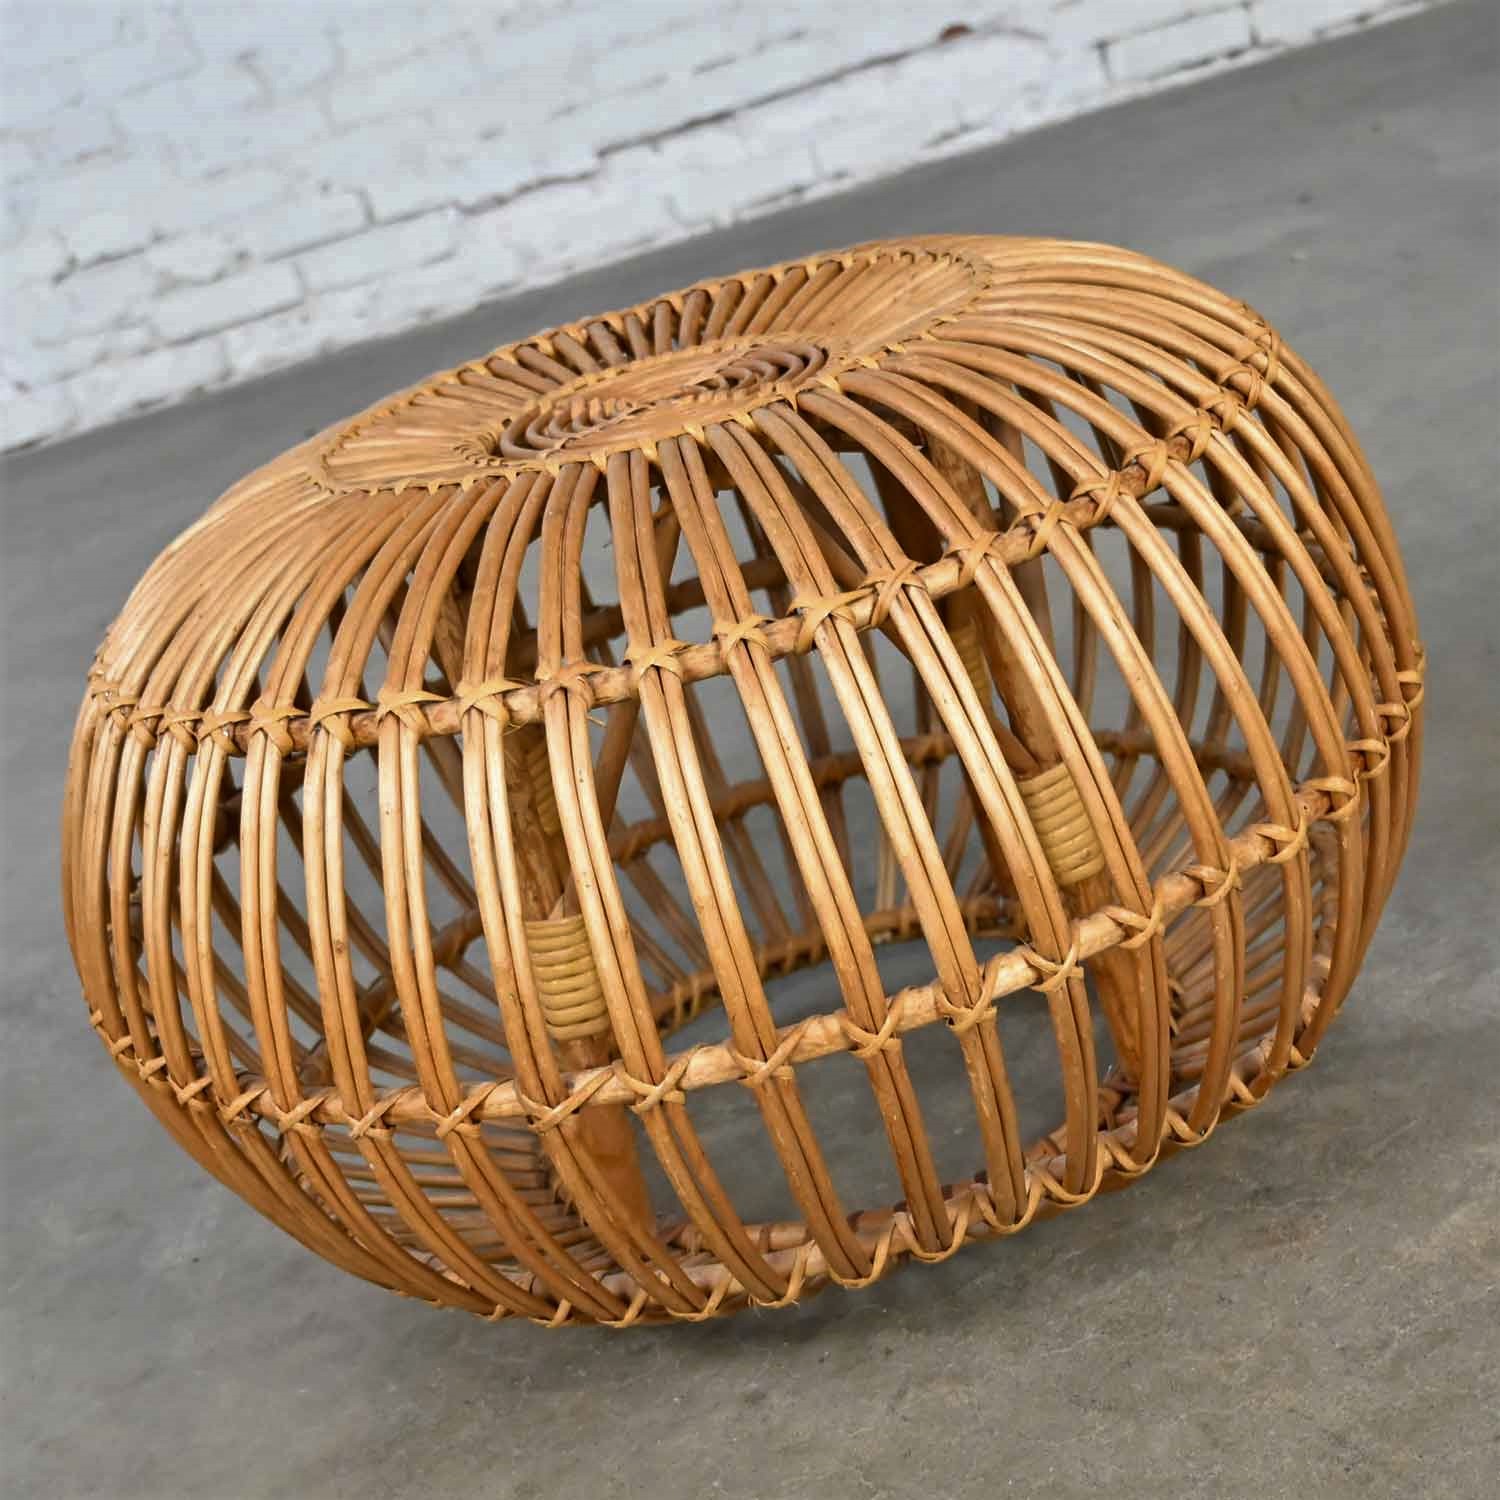 Vintage Mid-Century Modern Rattan Side Table Ottoman Pouf Attributed to Franco Albini